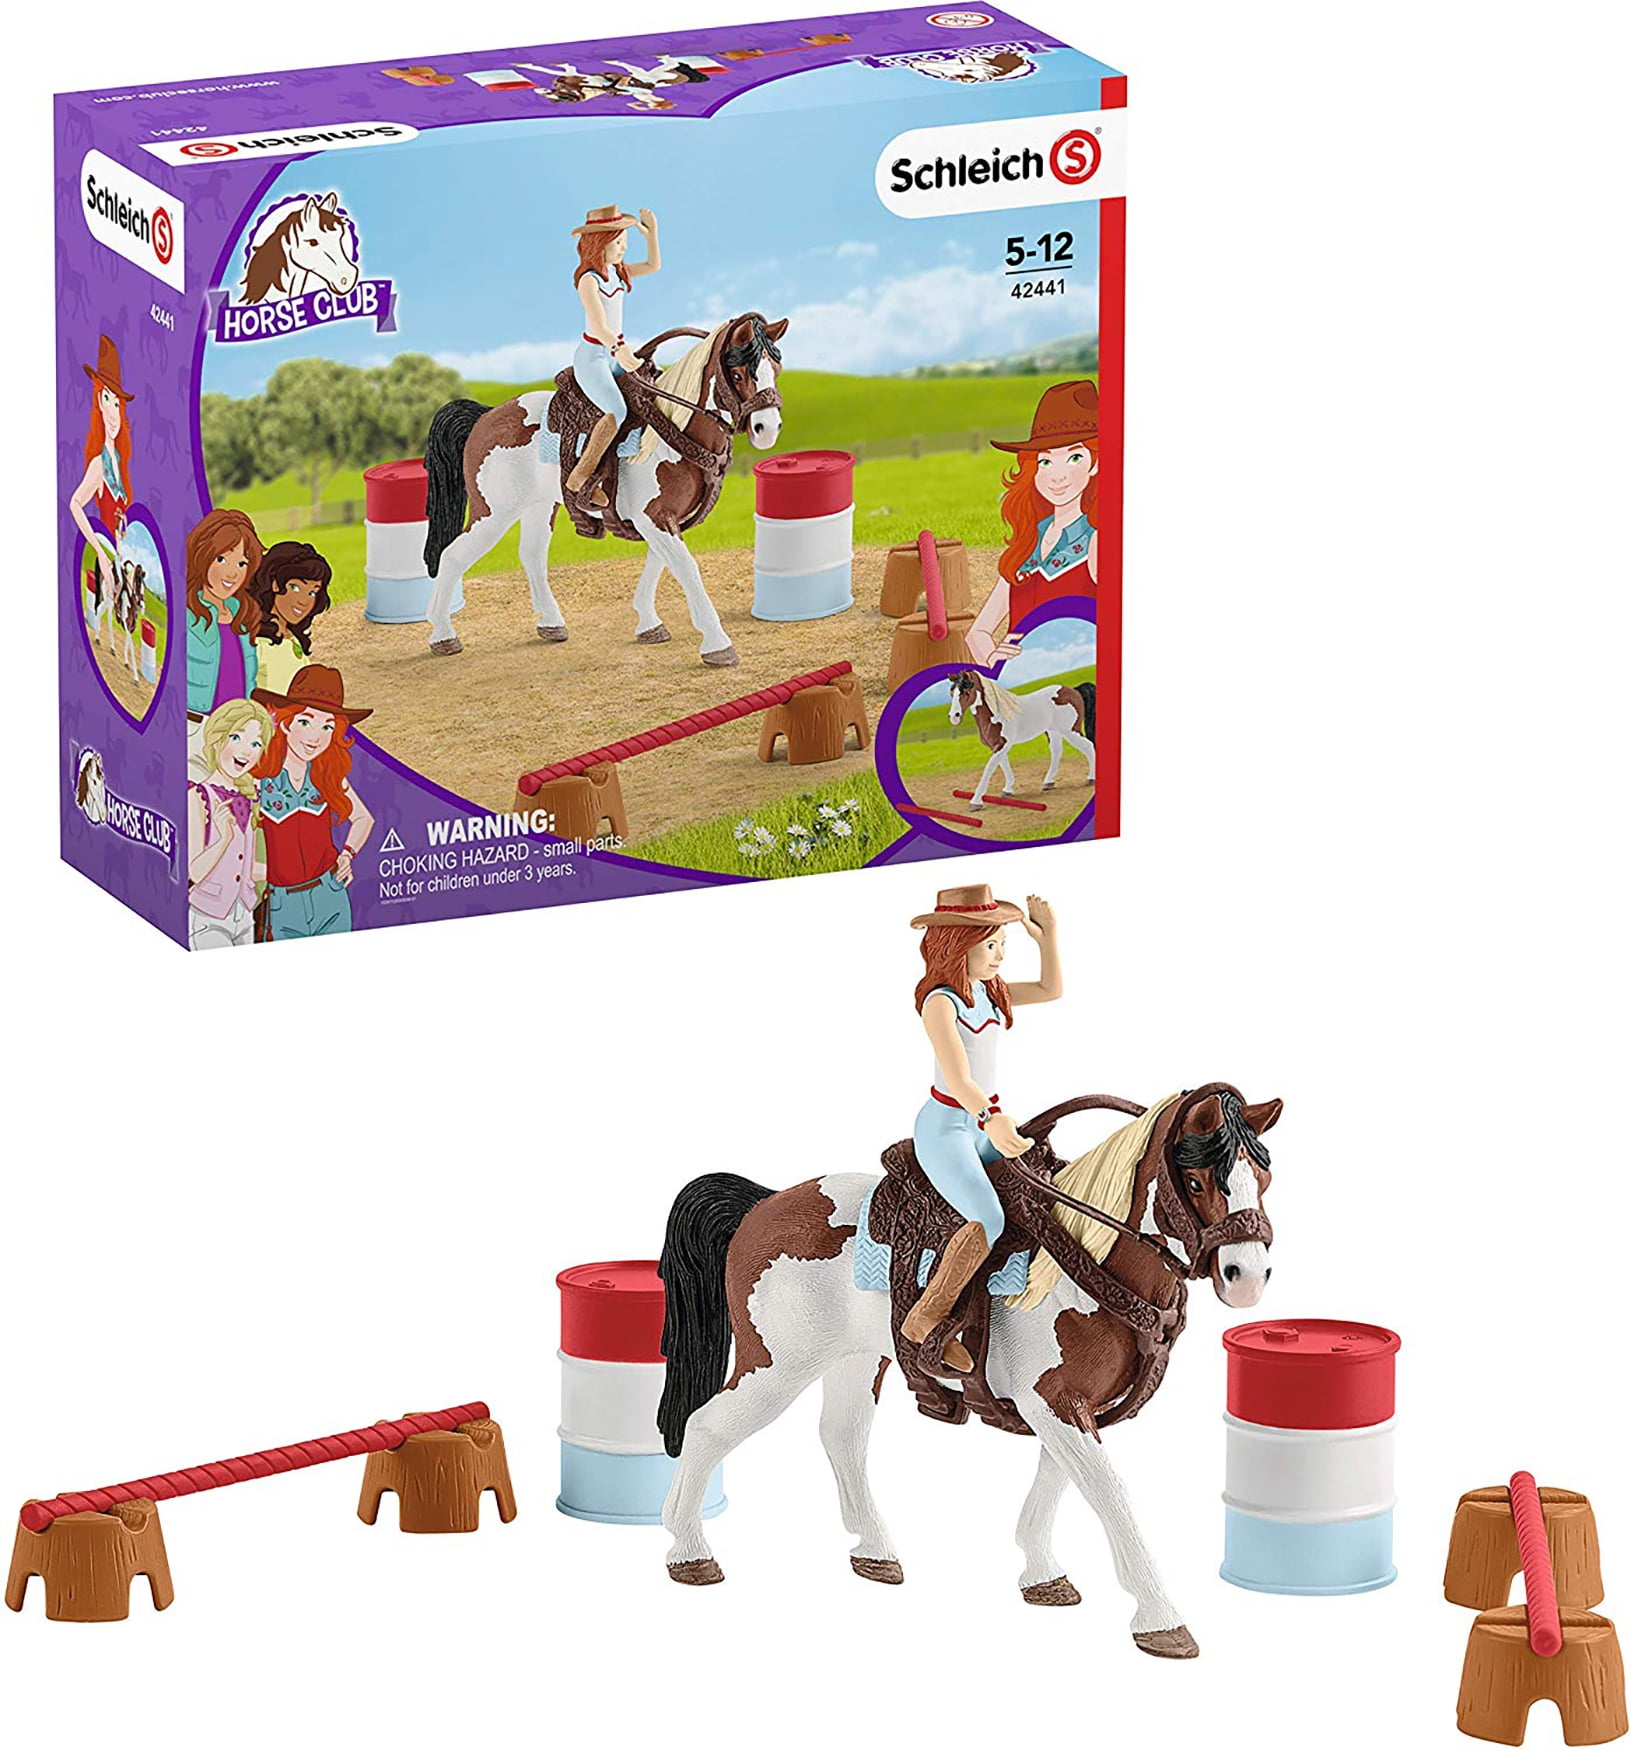 Equestrian Playset Brand New Large Set Schleich Horse Club The Big Tournament 